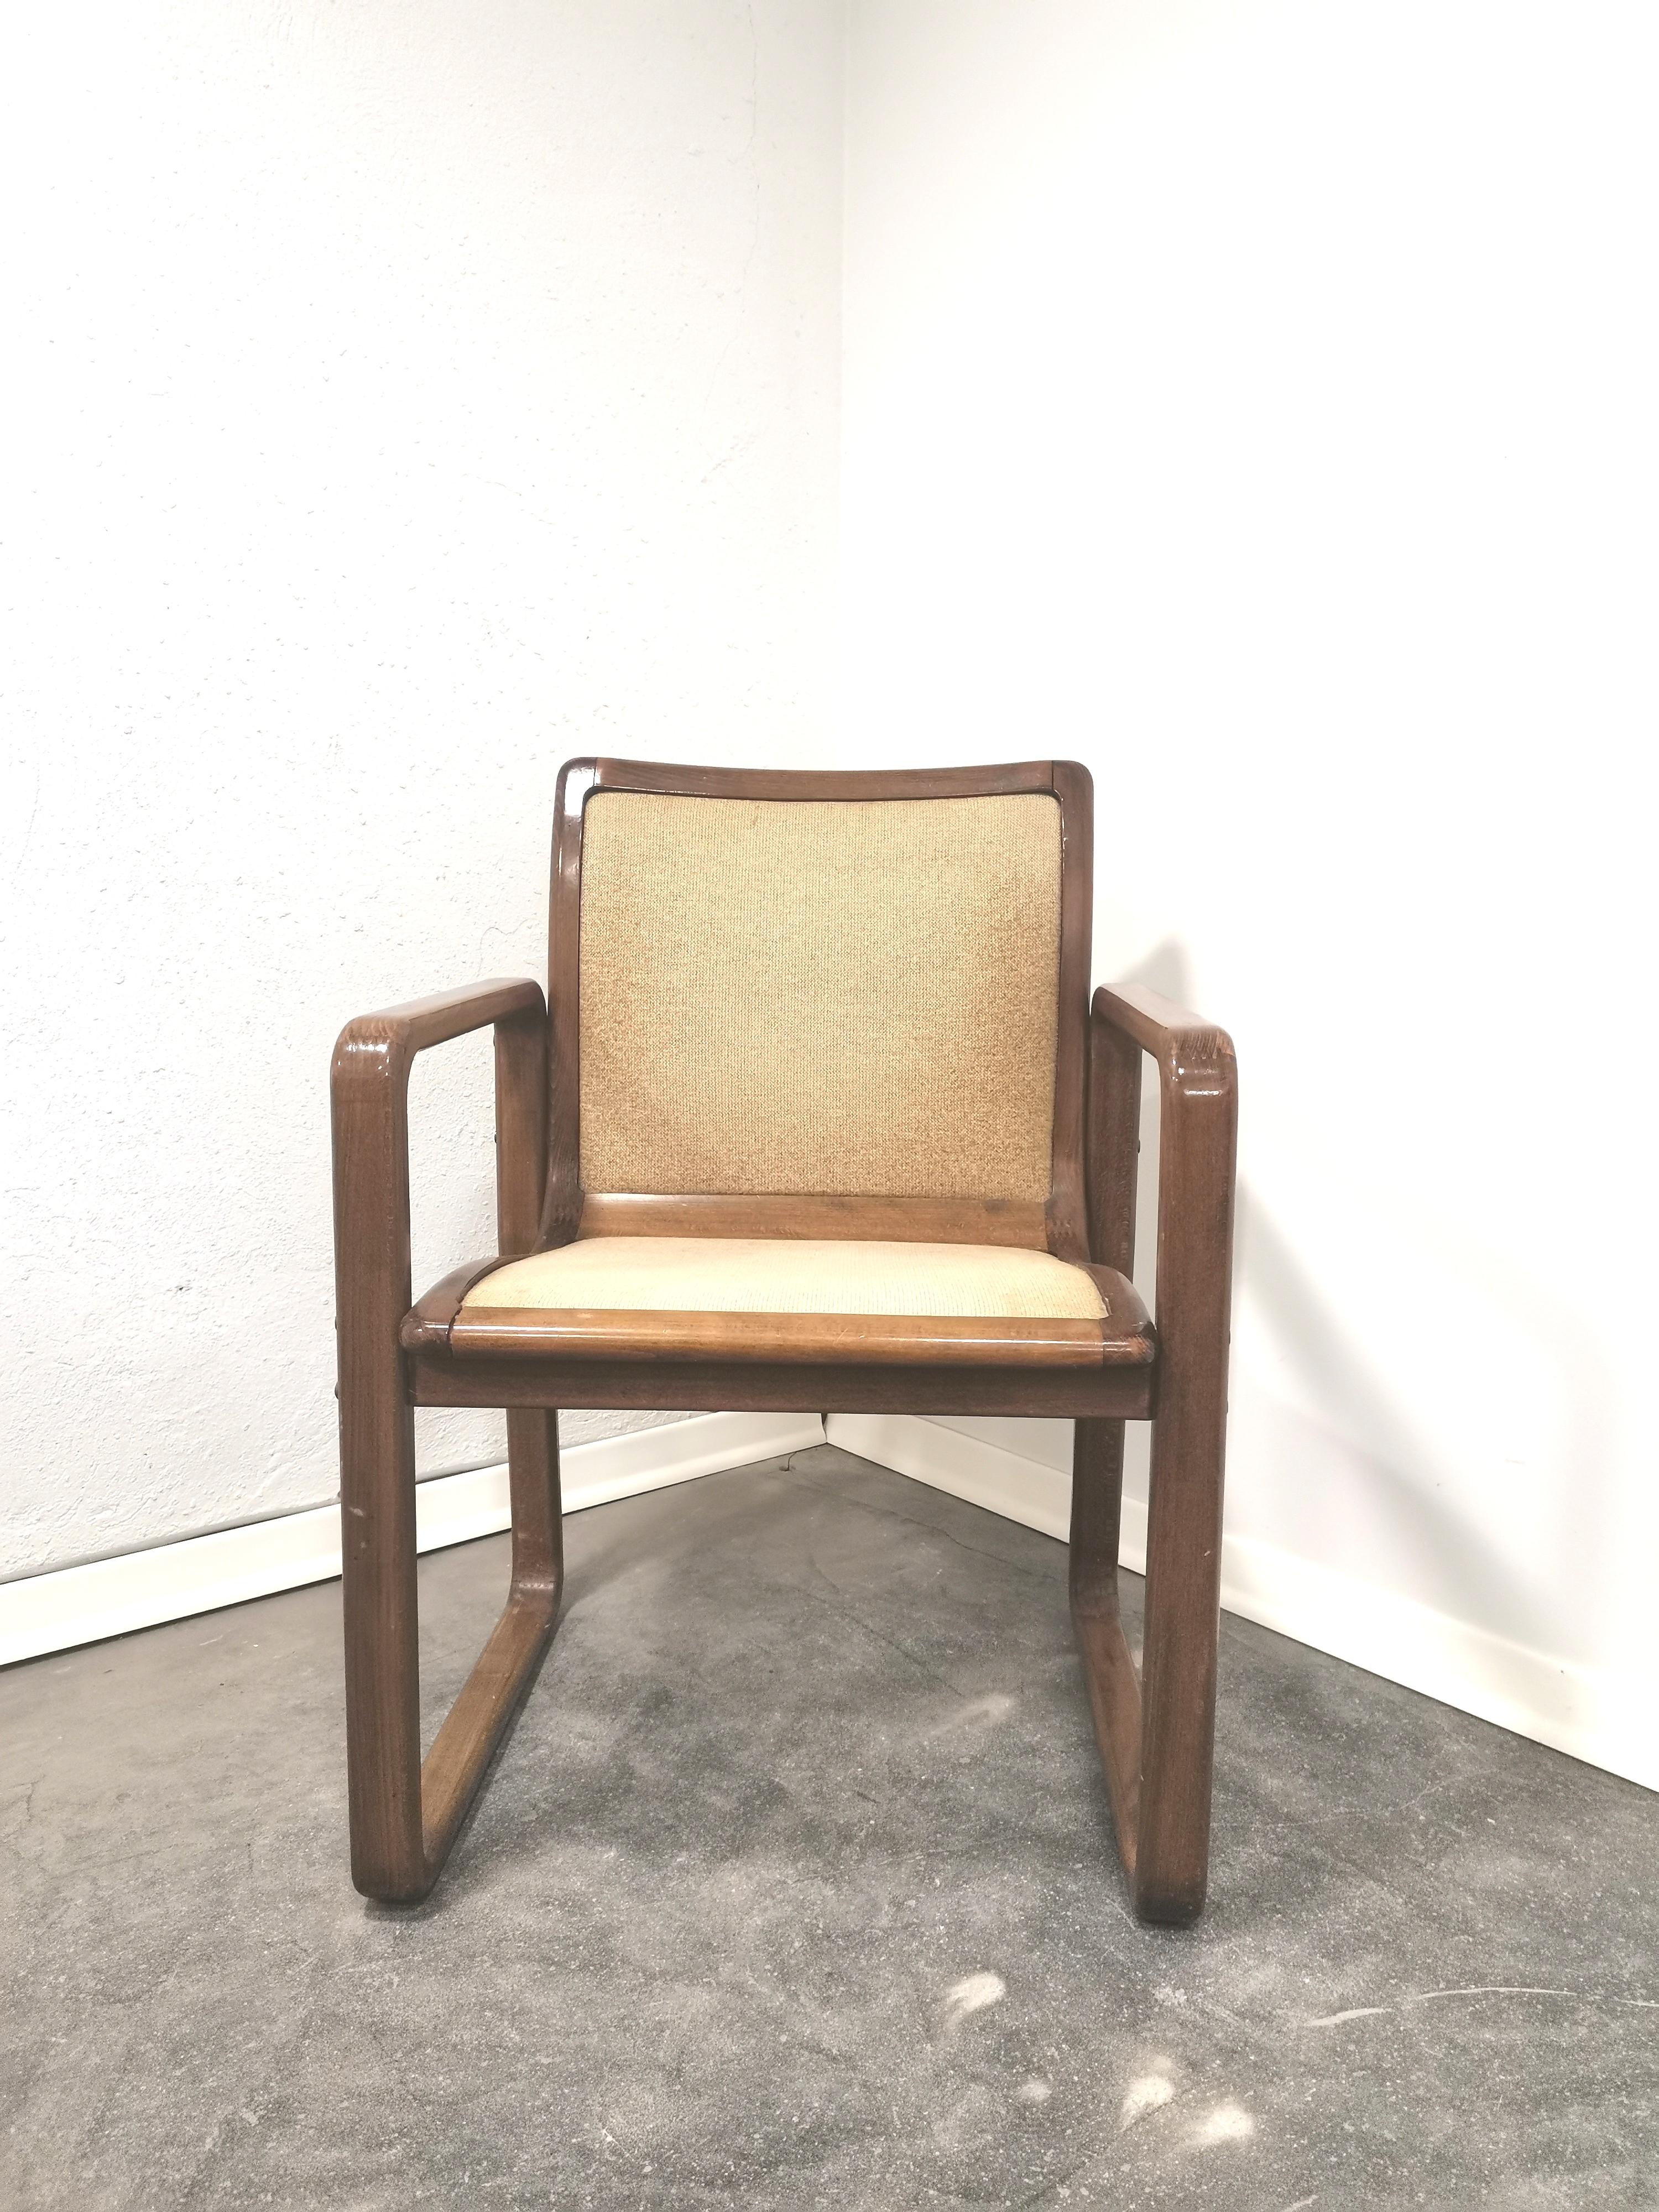 The chair could be said to be an iconic piece as it embodies style and comfort.

It can easily represent a central piece of furniture that will always be admired.

A very pleasant sitting height that enables relaxed sitting and at the same time the